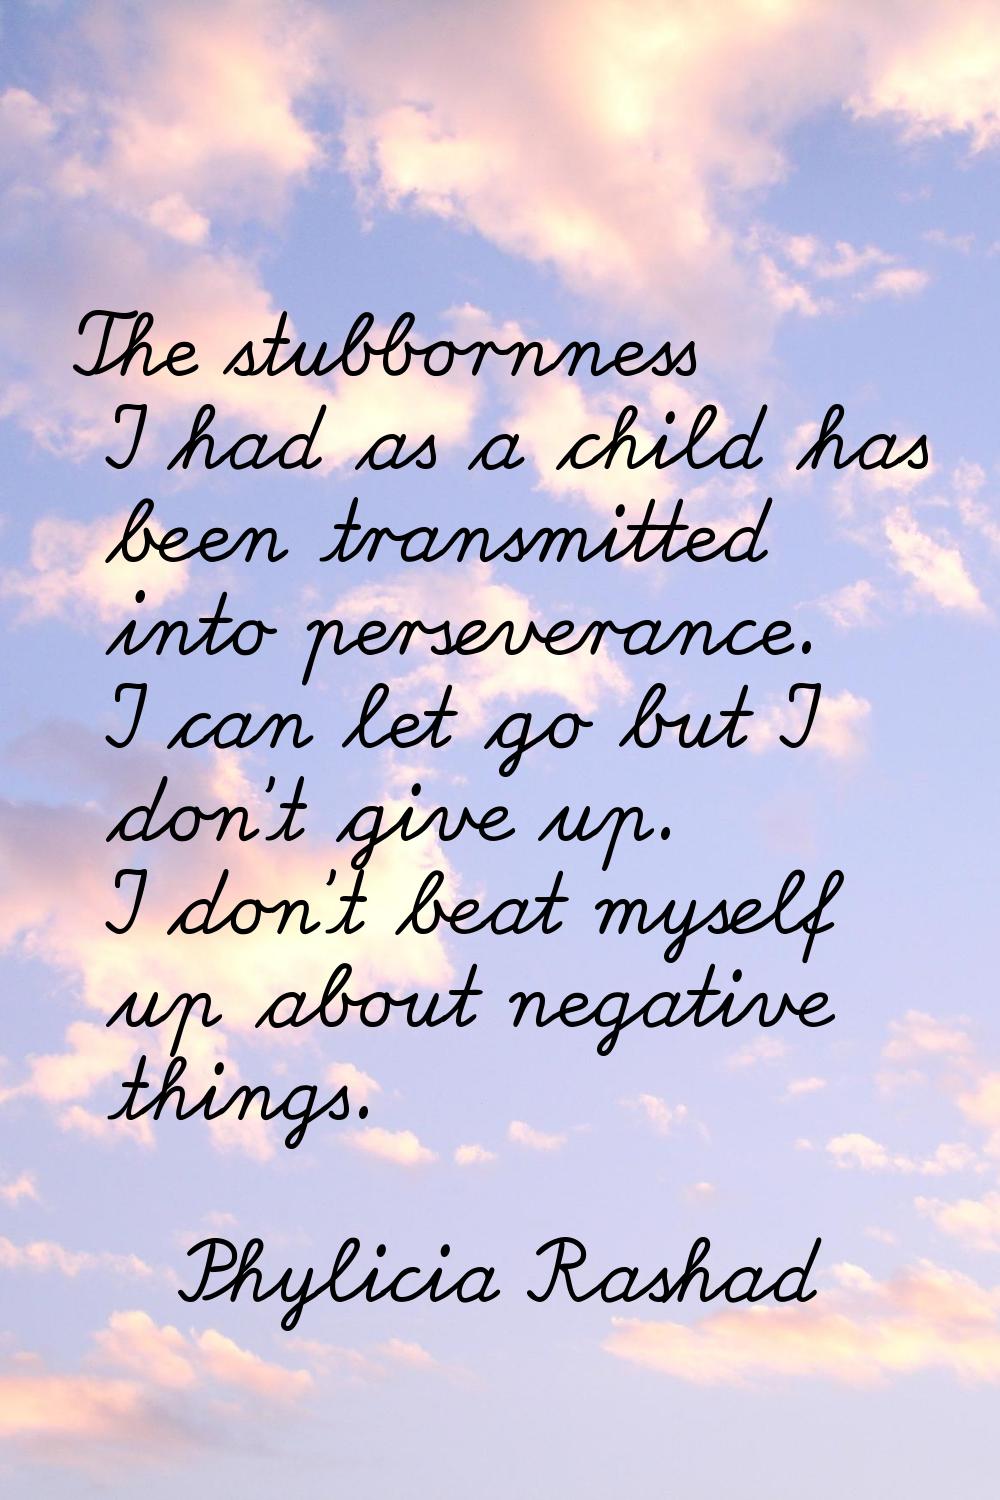 The stubbornness I had as a child has been transmitted into perseverance. I can let go but I don't 